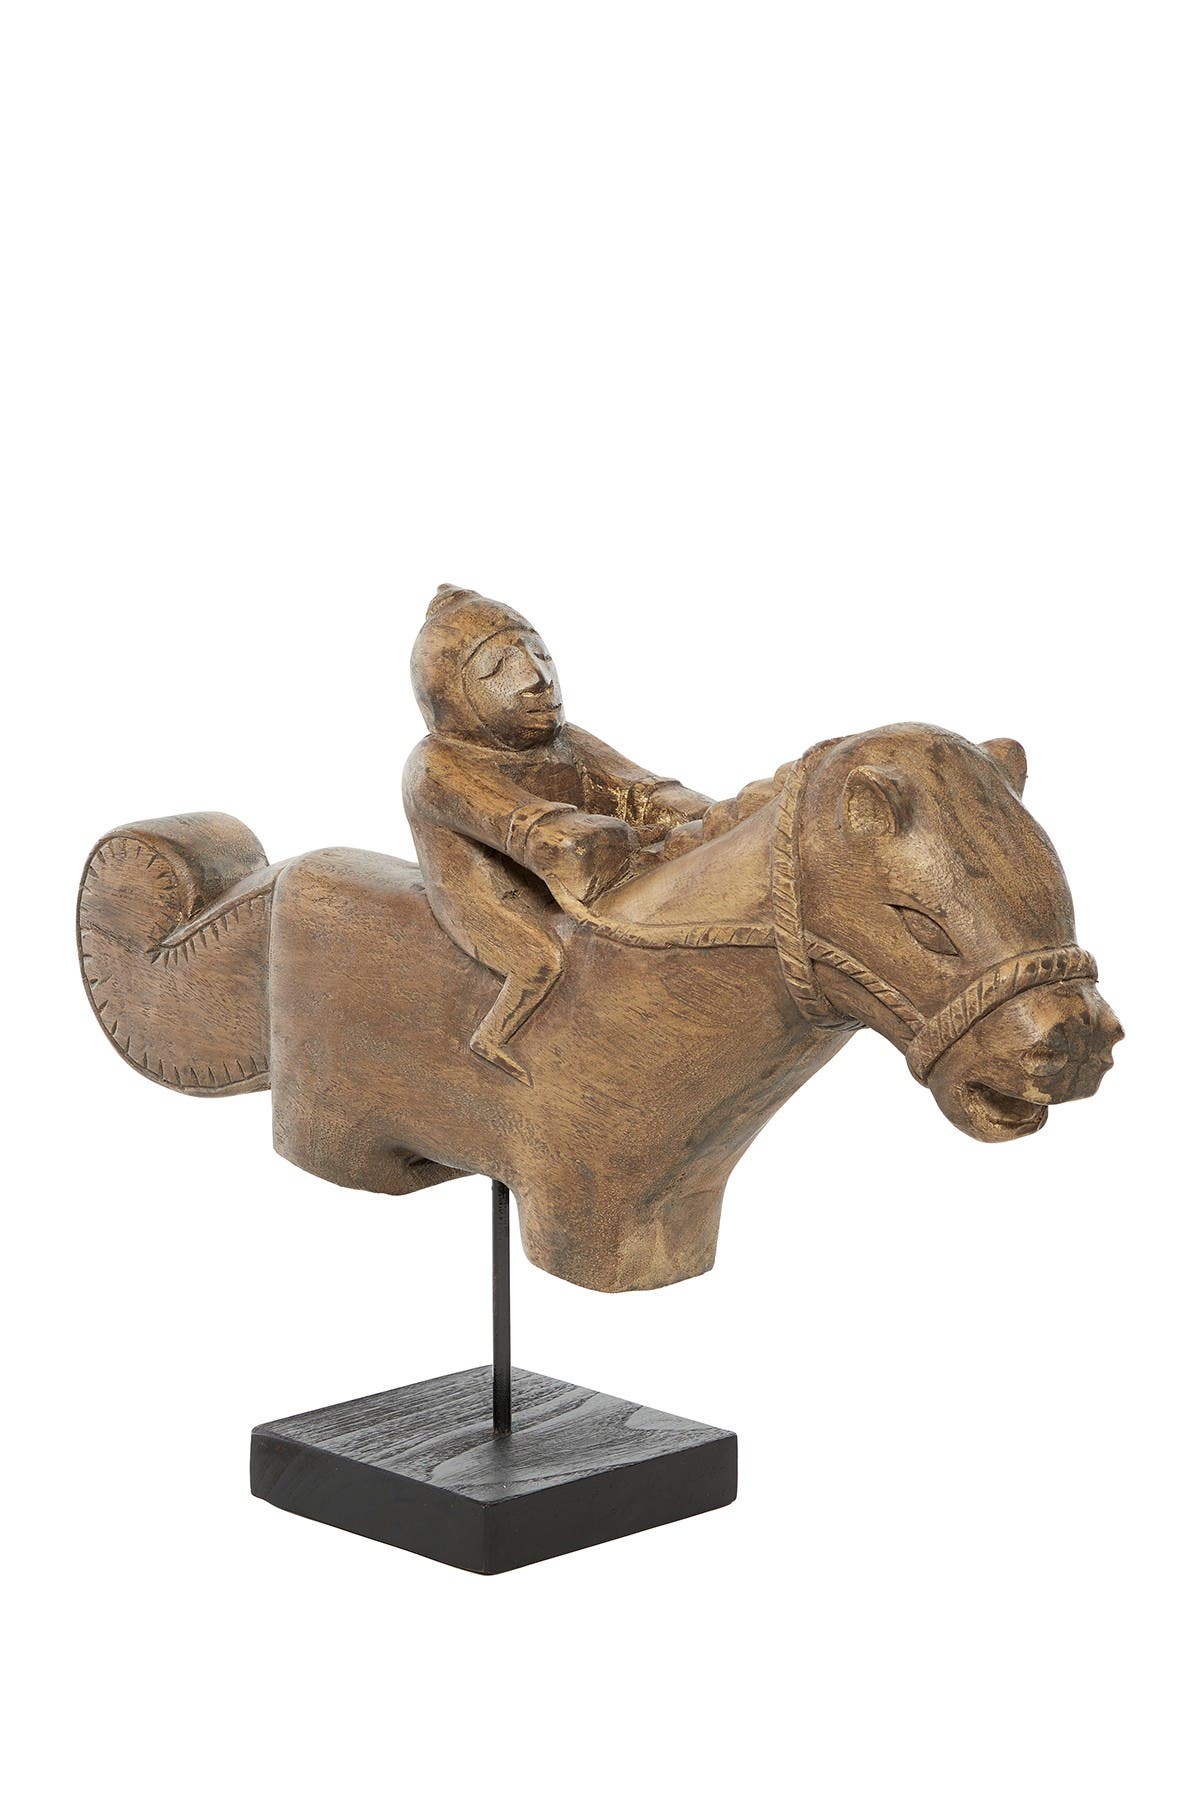 Venus Williams Natural Wood Asian Equestrian & Horse Sculpture On Stand In Brown